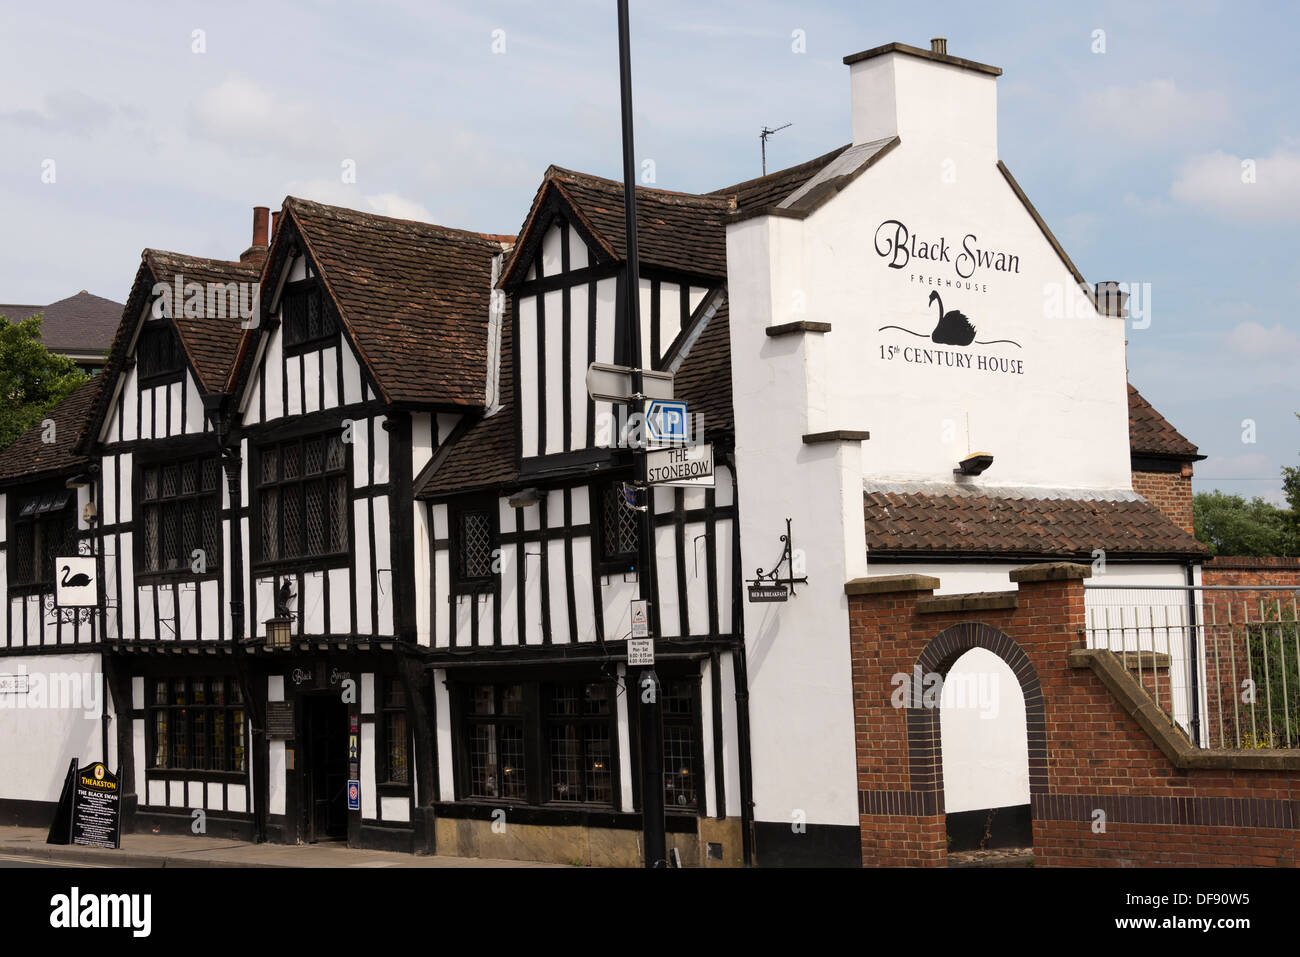 The Black Swan 15th in York, North England Stock Photo - Alamy